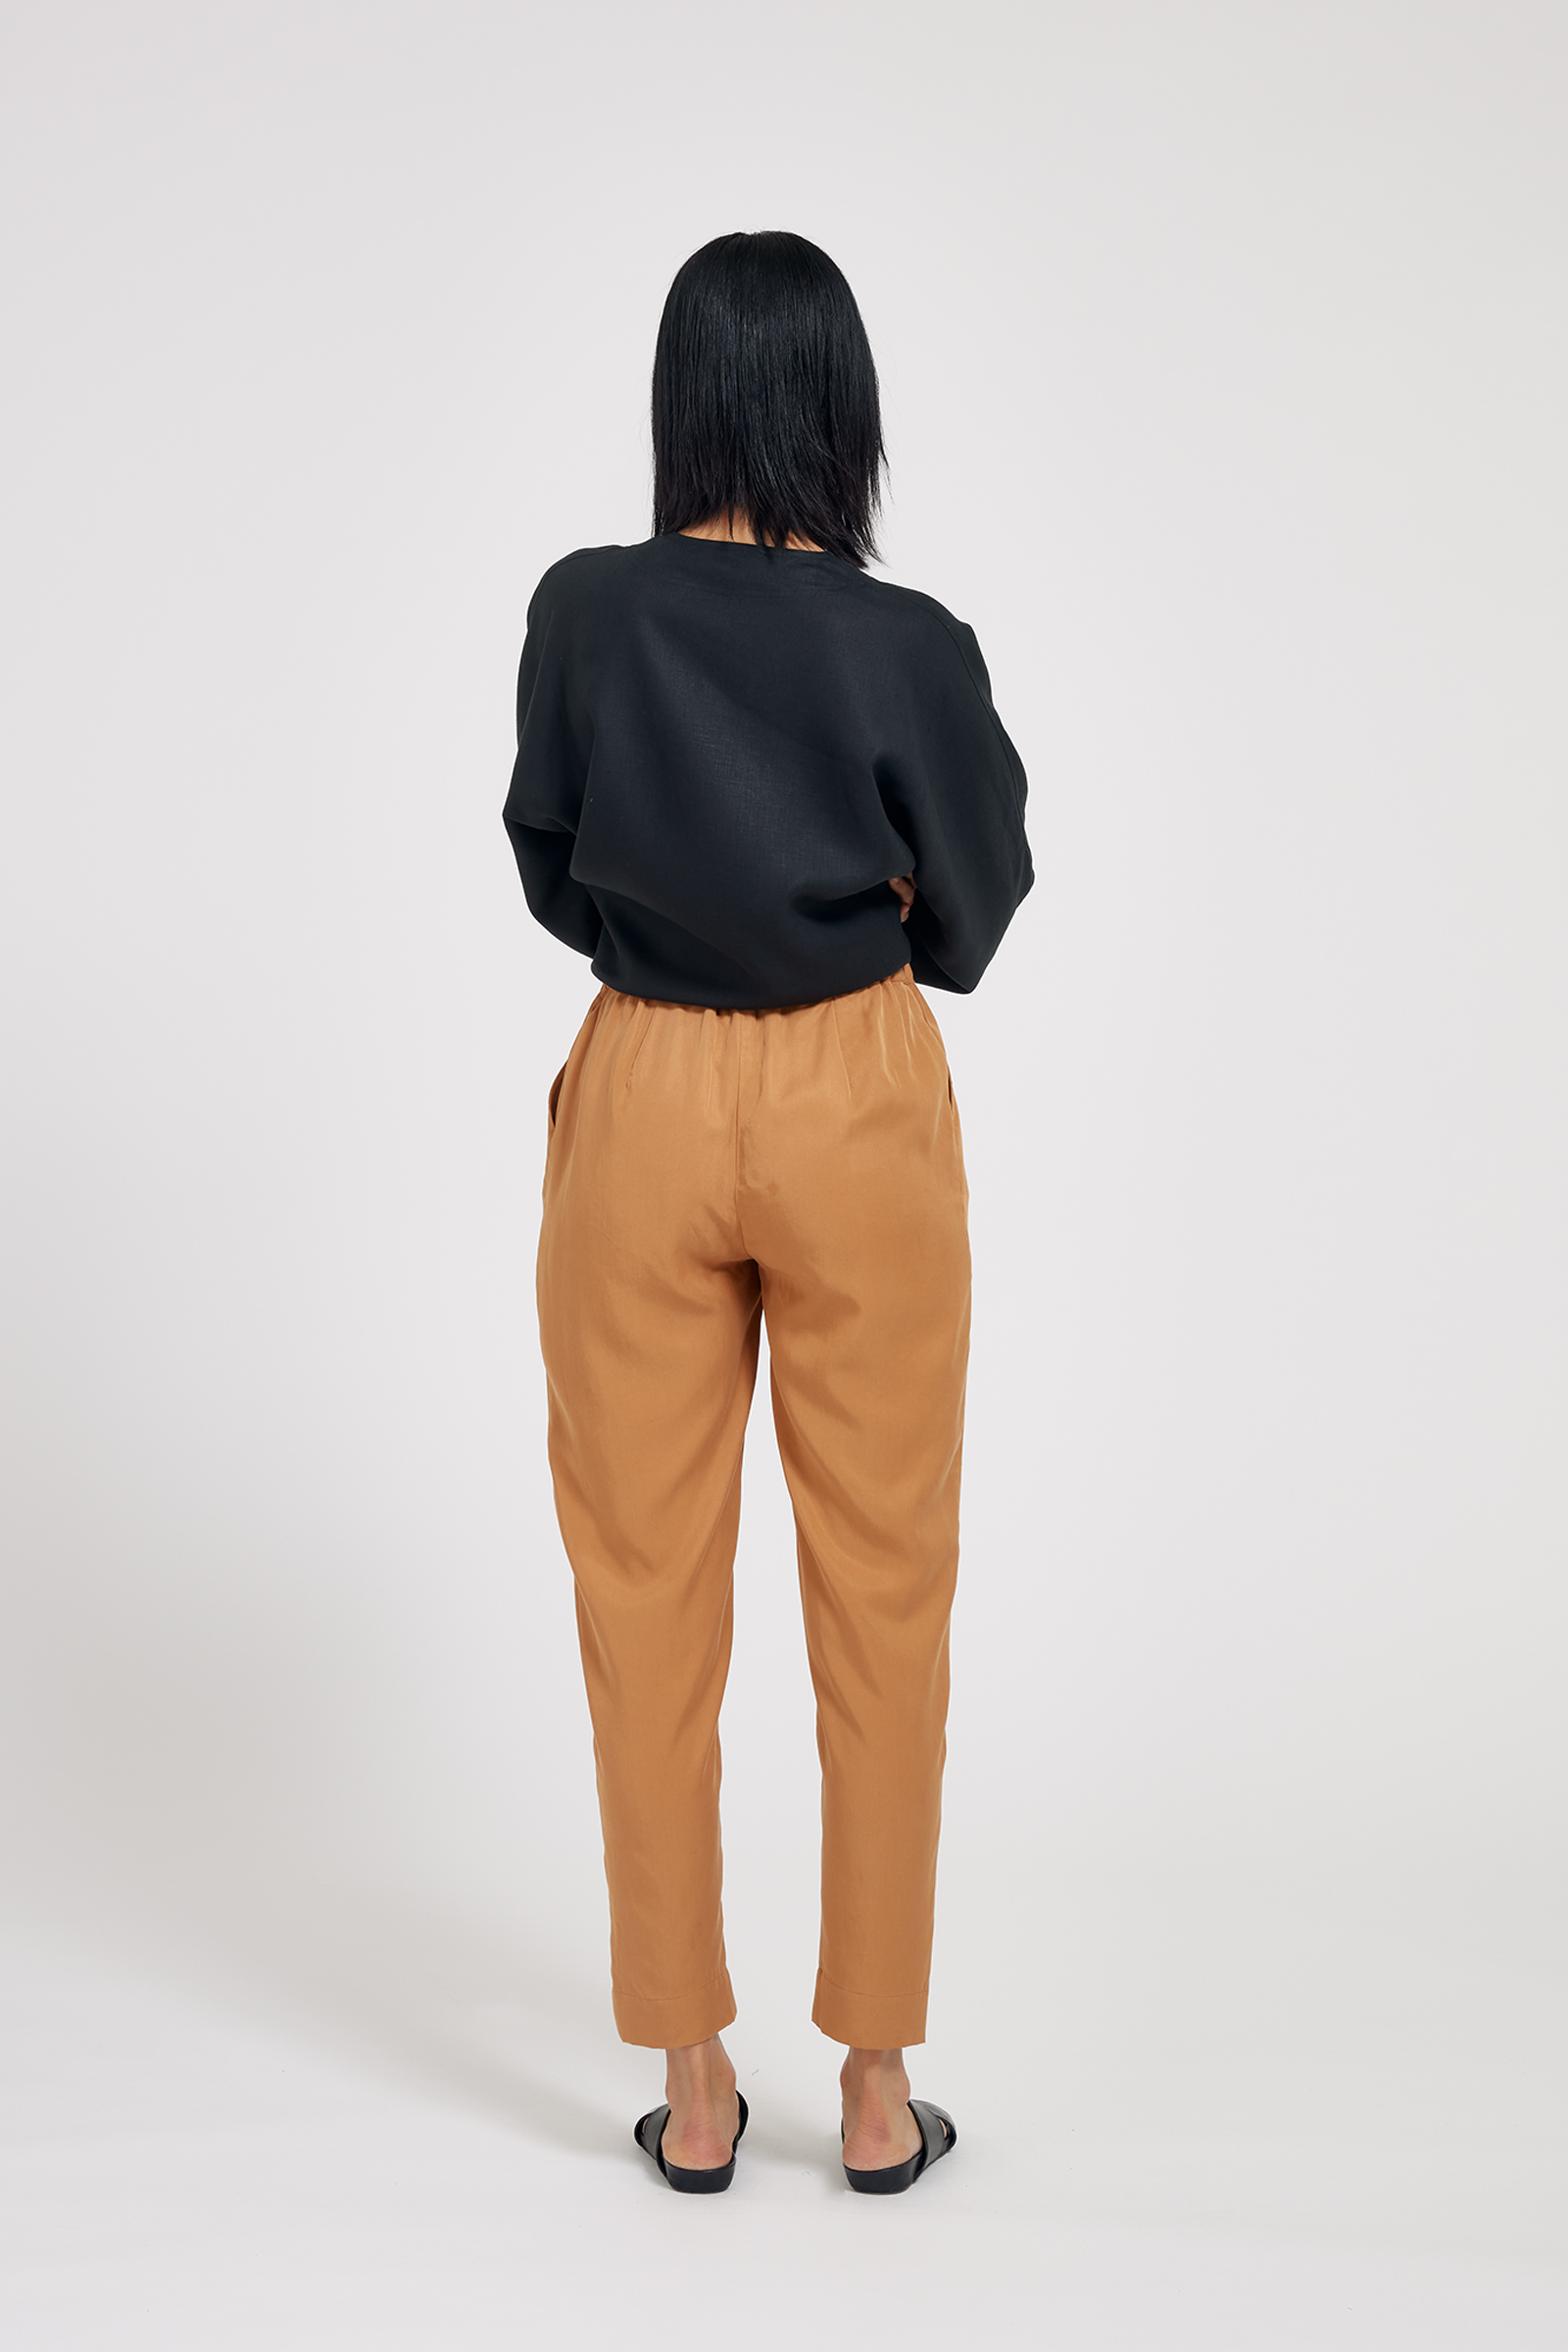 Women's linen suit trousers | Sophie and Lucie